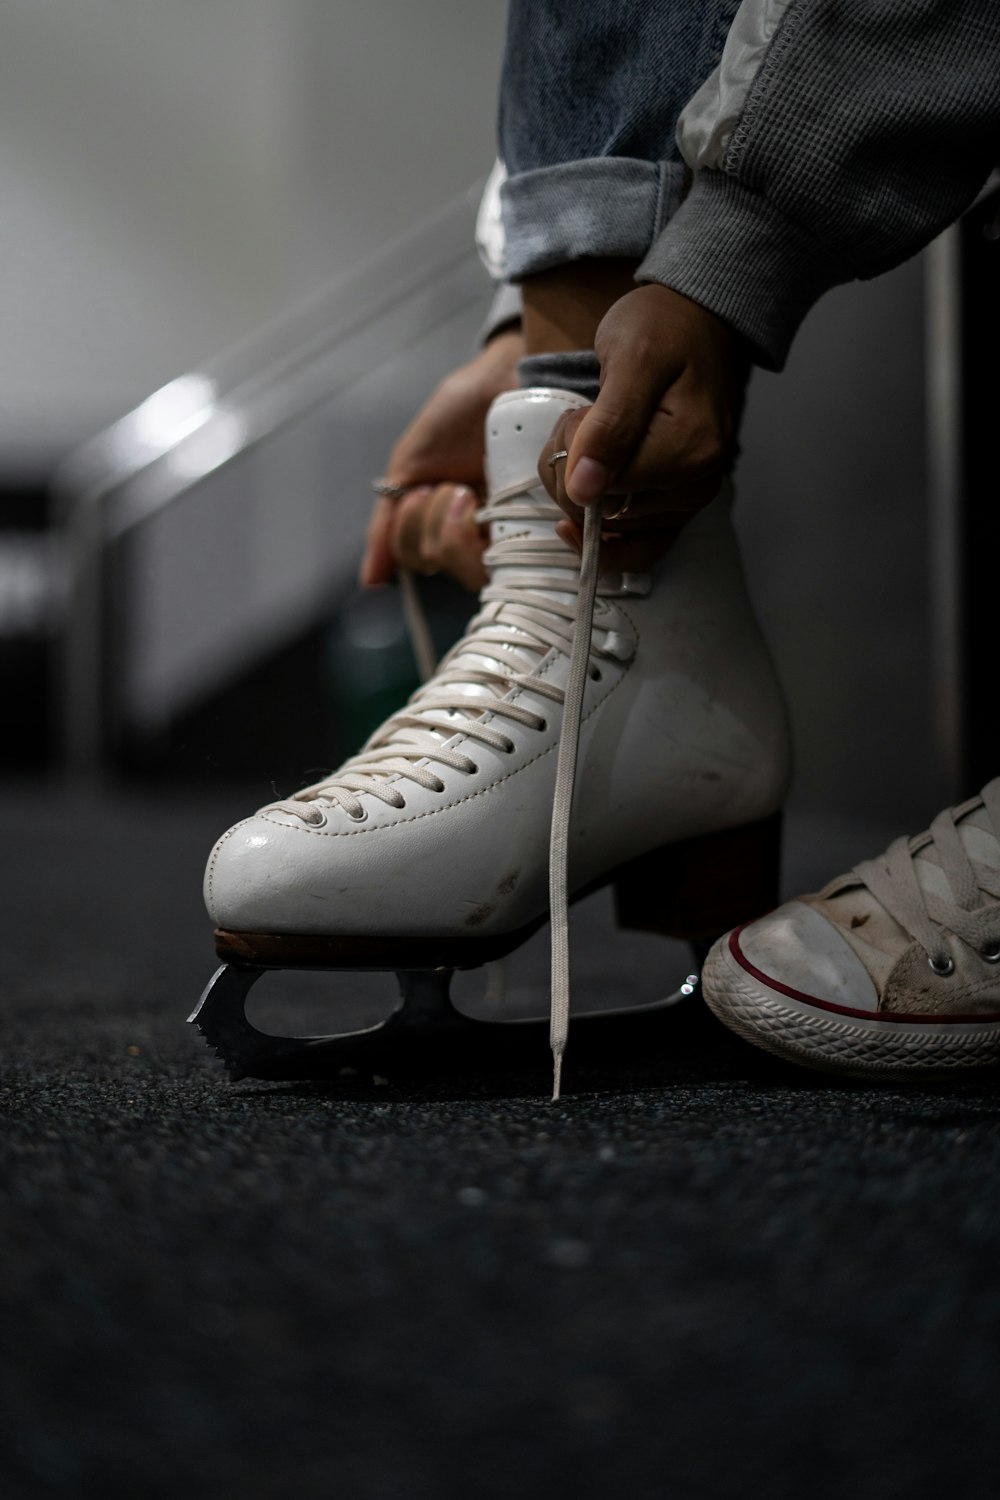 person wearing white leather ice skate